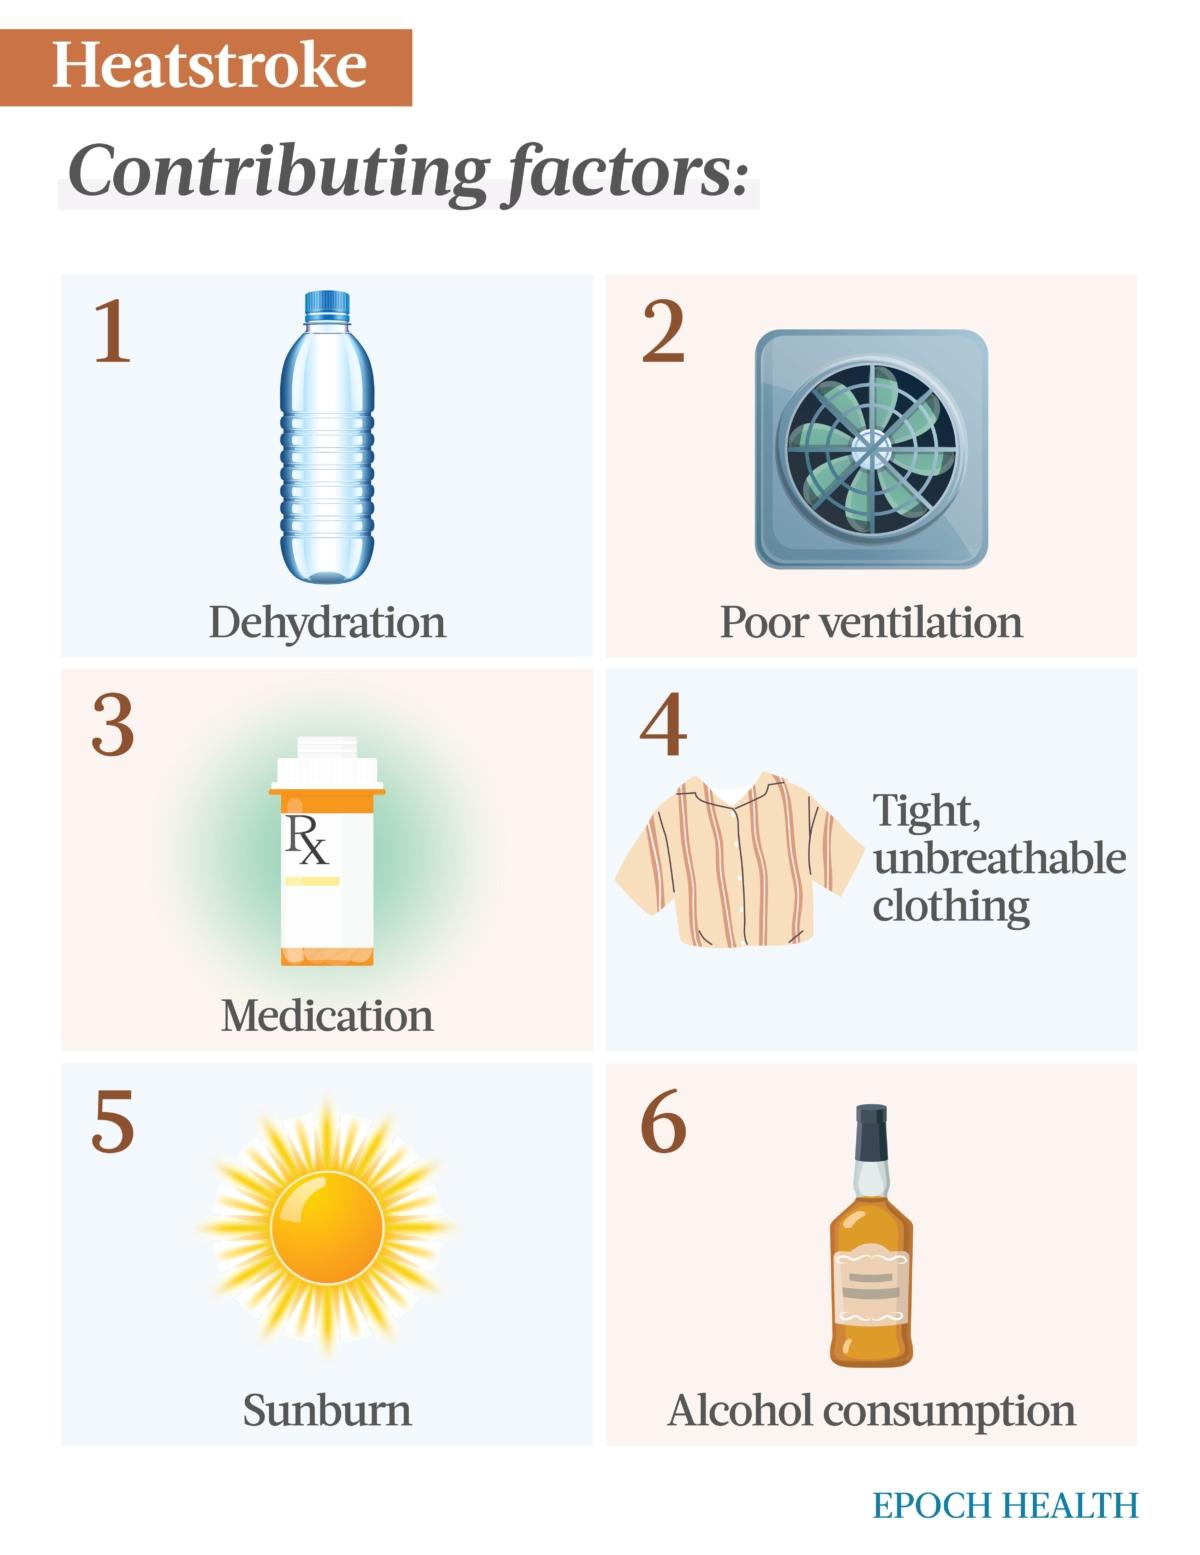  Any one or a combination of these factors can put you at risk of heatstroke when the weather is scorching. (The Epoch Times)